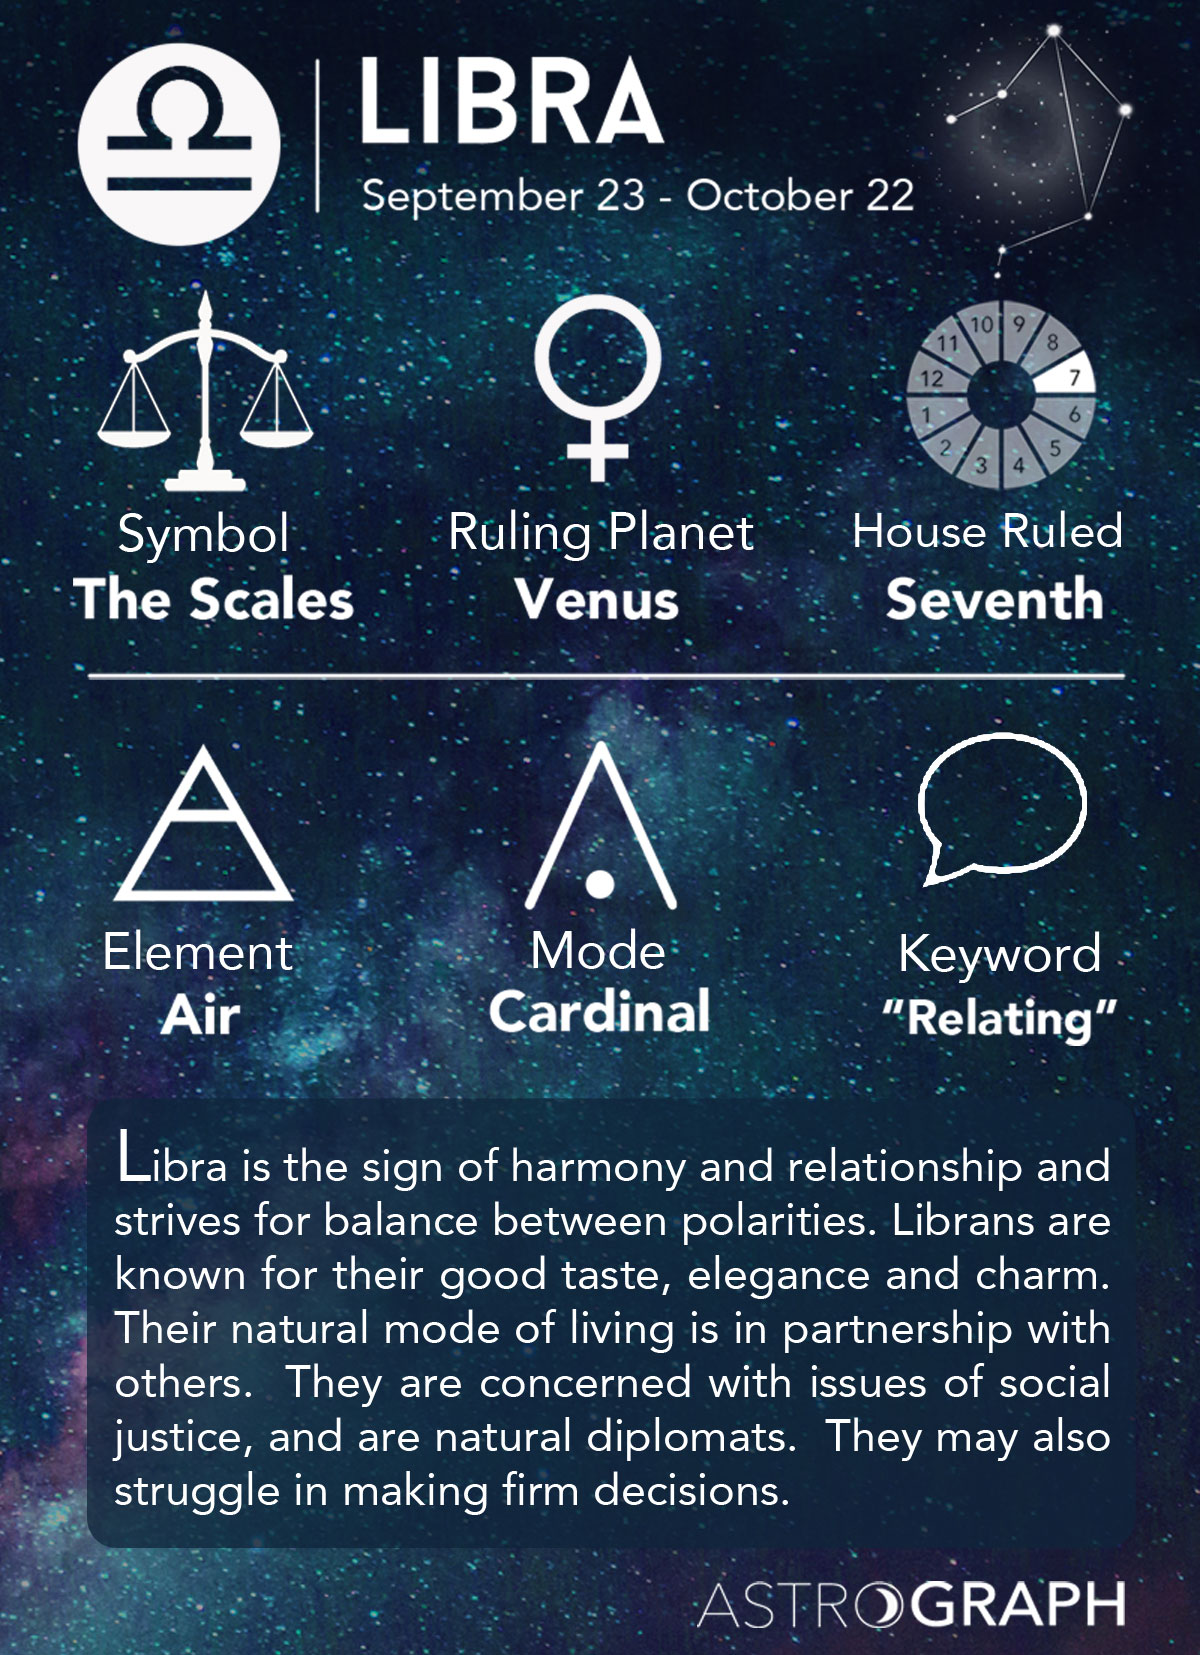 What planet is for Libra?